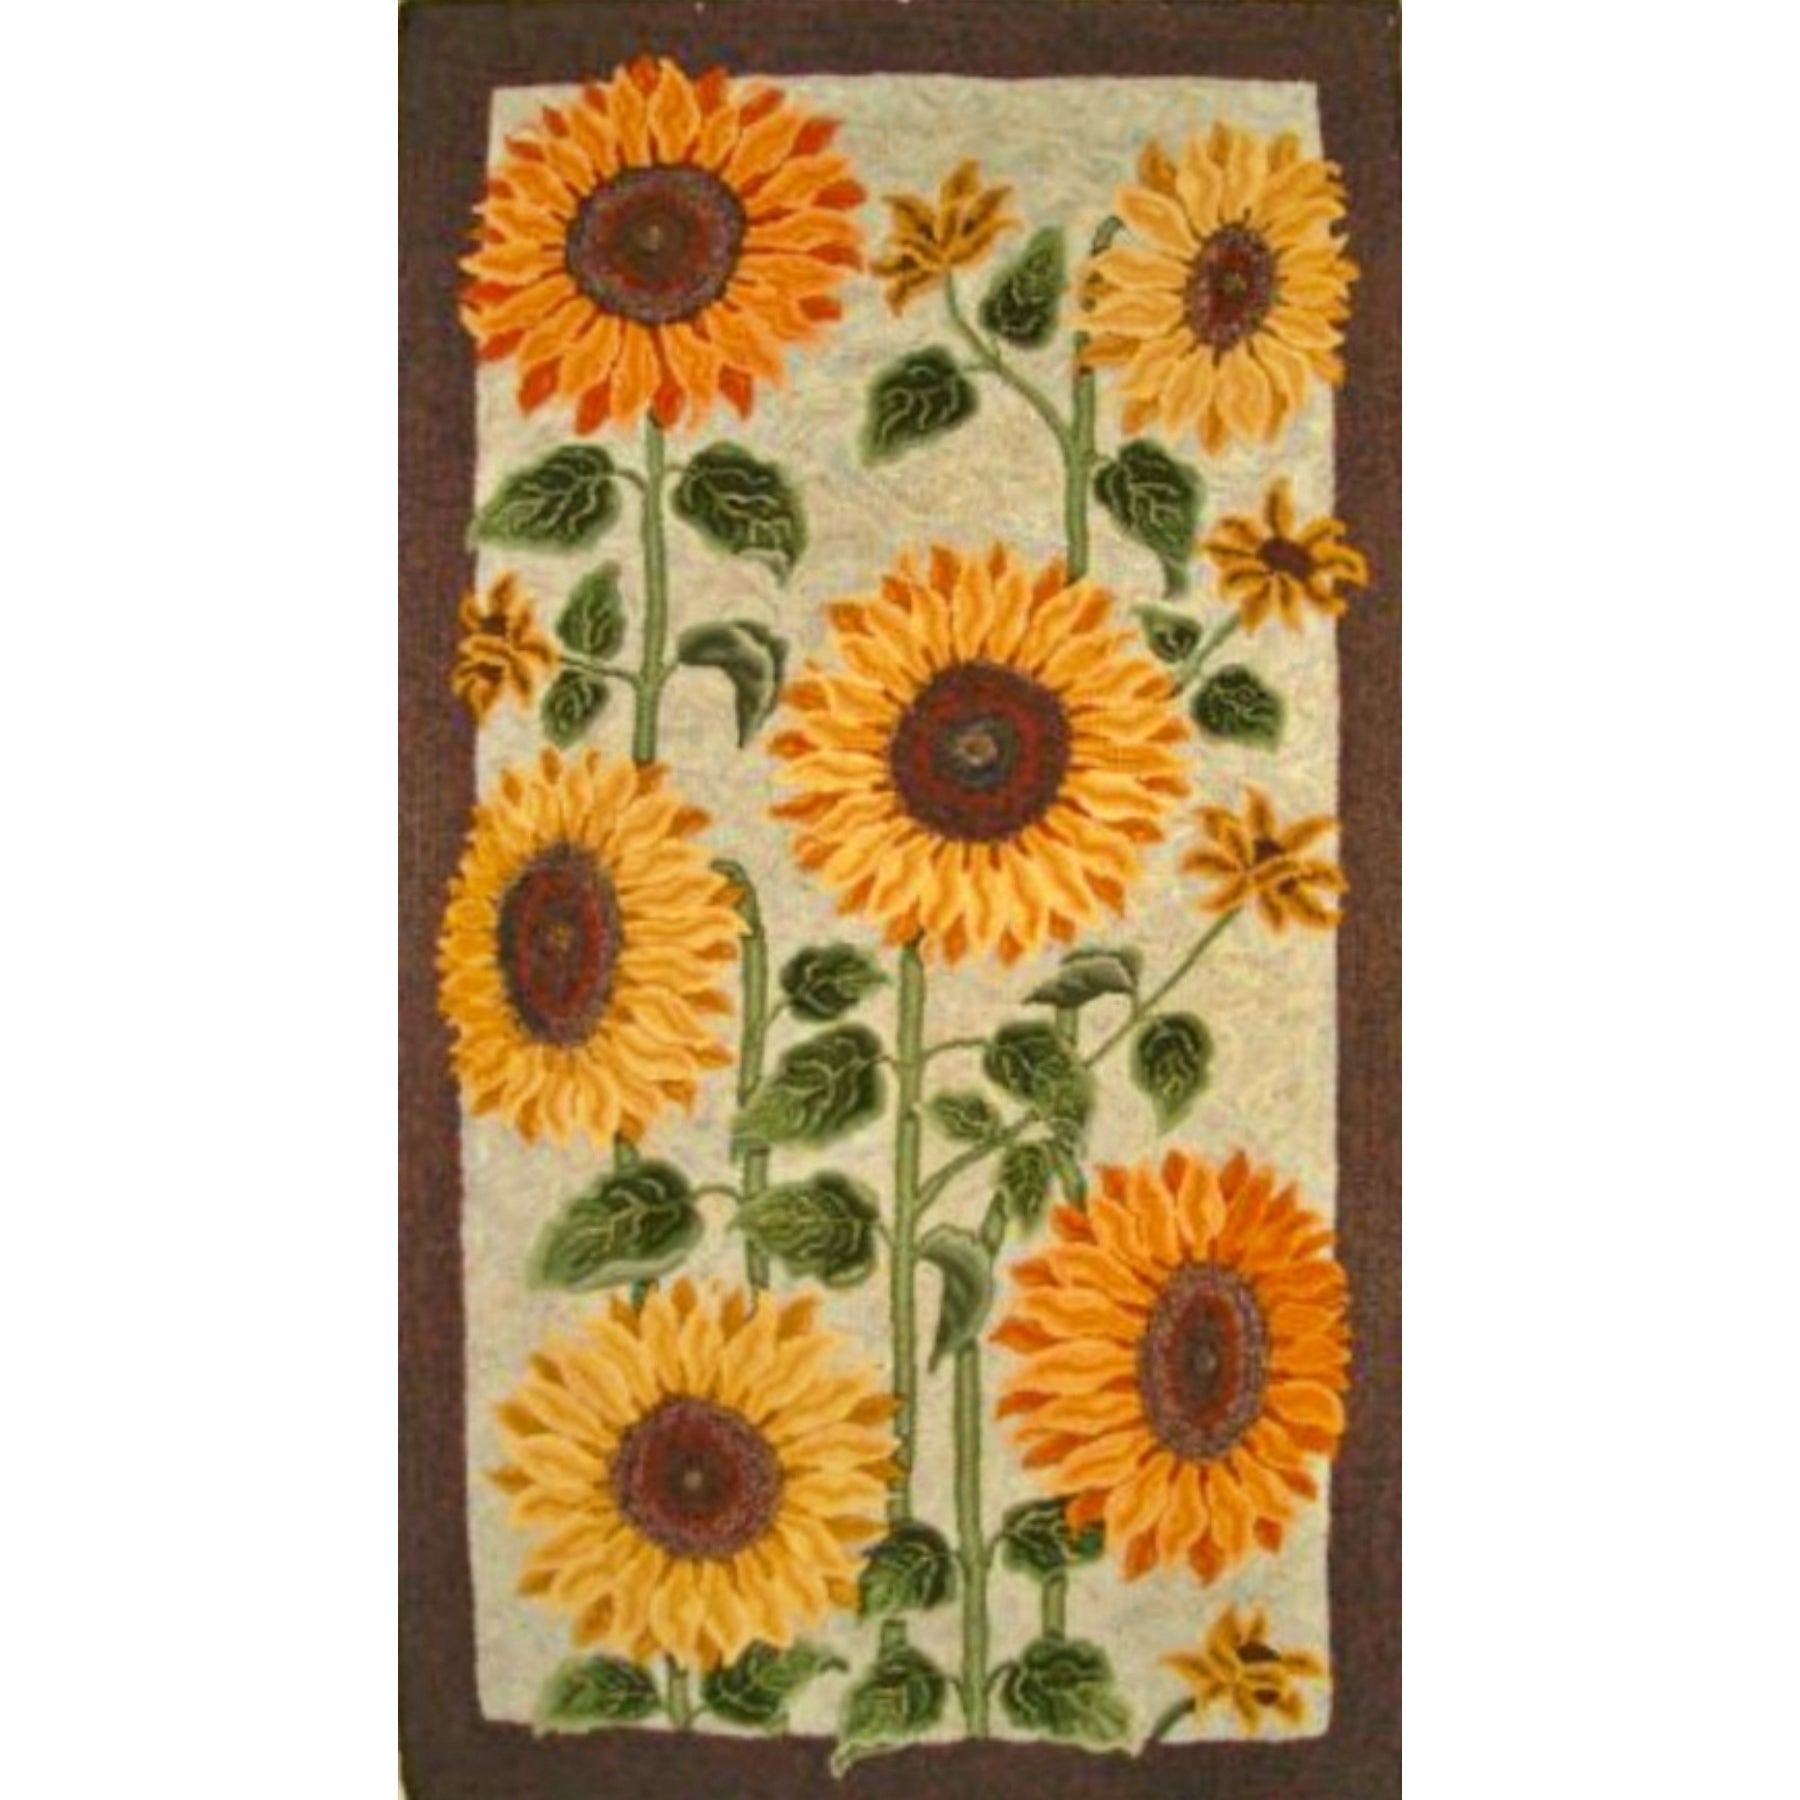 Sunflowers, rug hooked by Stacey Van Dyne